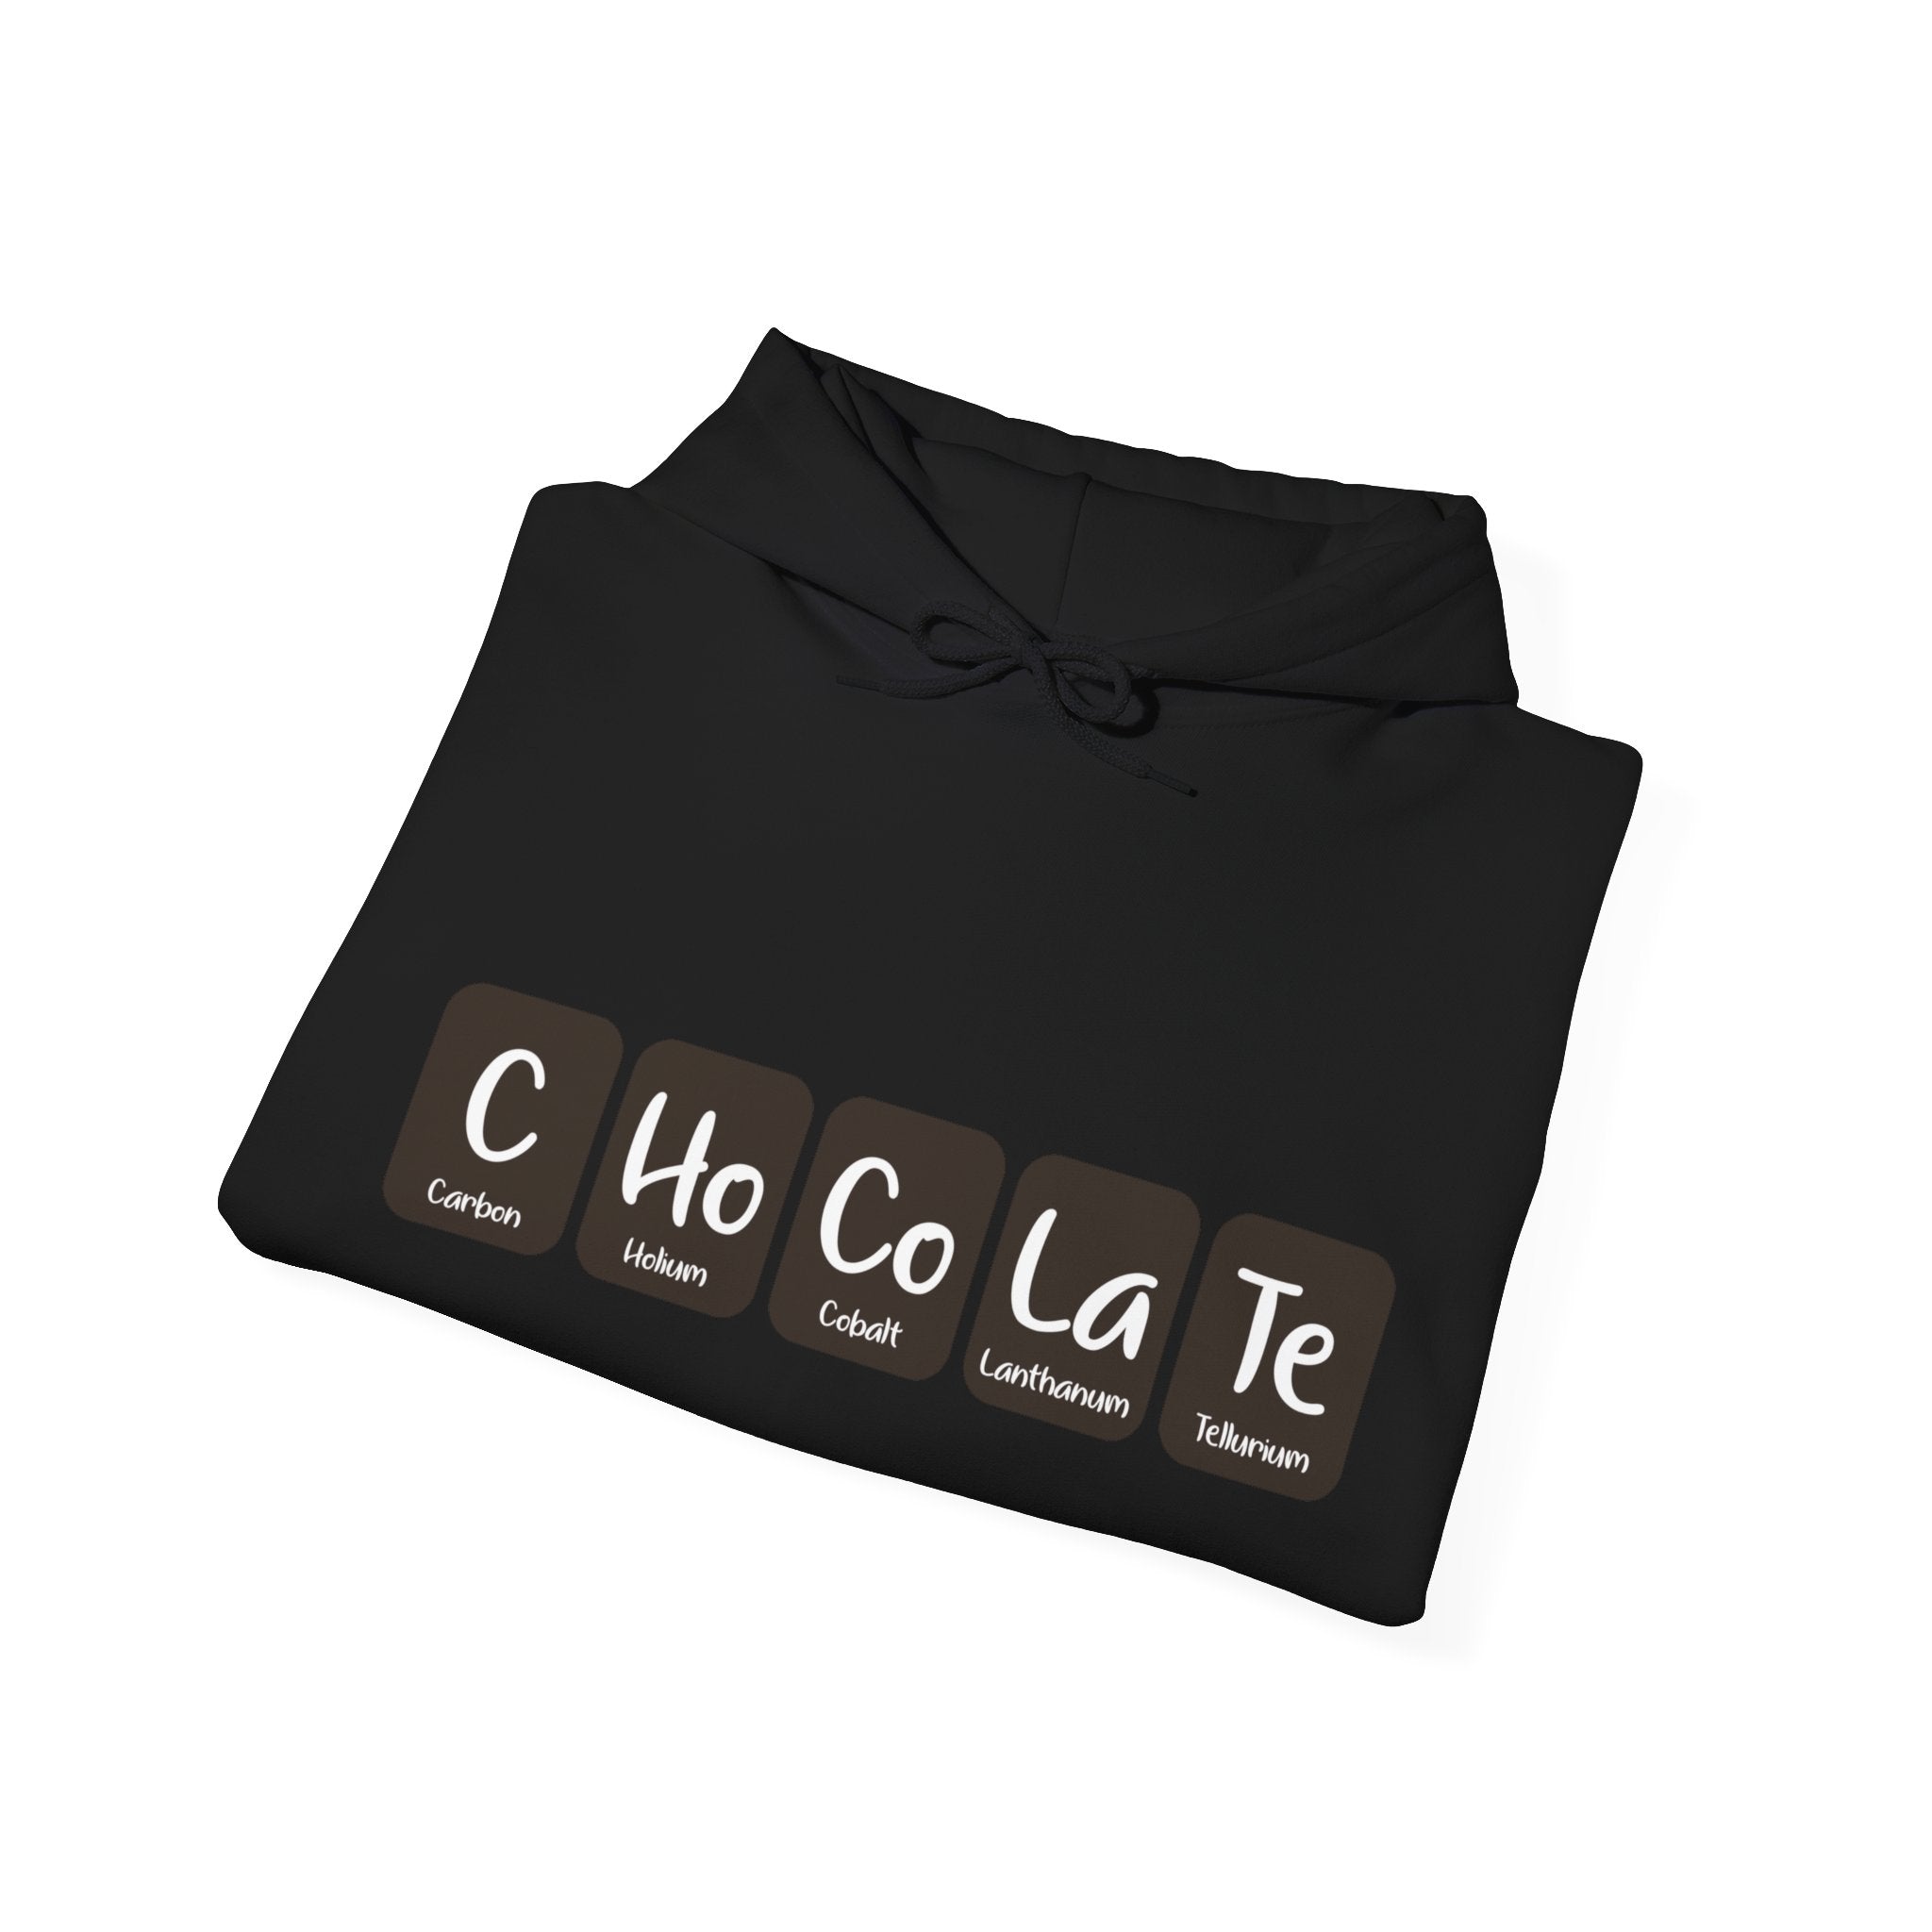 A C-Ho-Co-La-Te - Hooded Sweatshirt featuring the C-Ho-Co-La-Te design, with "CHoCoLaTe" cleverly spelled out using elements from the periodic table: Carbon (C), Holmium (Ho), Cobalt (Co), Lanthanum (La), and Tellurium (Te). Fashion-forward and scientifically stylish.